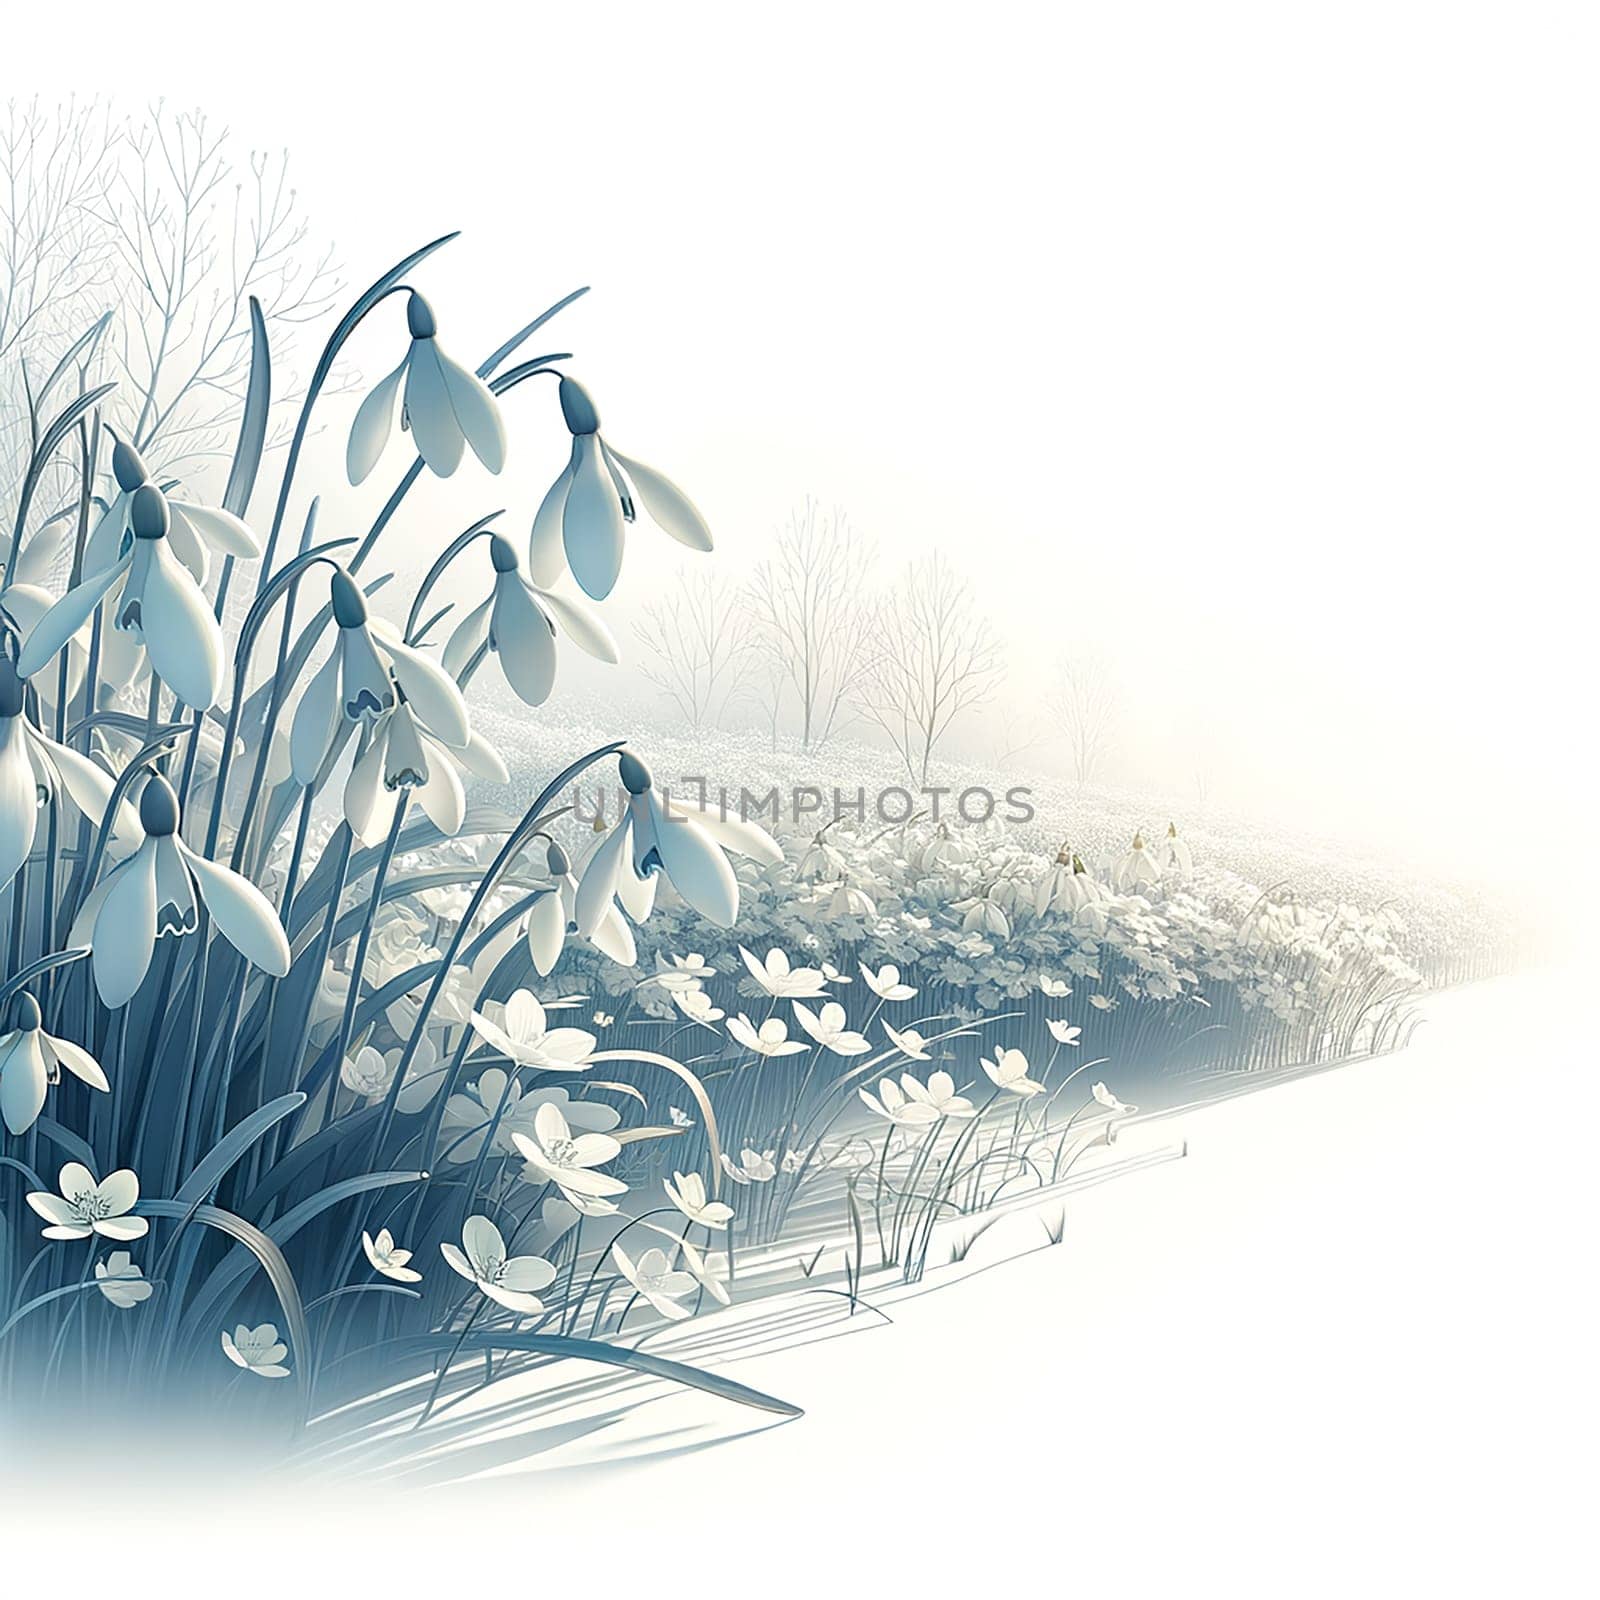 Whispers of Spring: Snowdrops in Soft-Toned Isolation